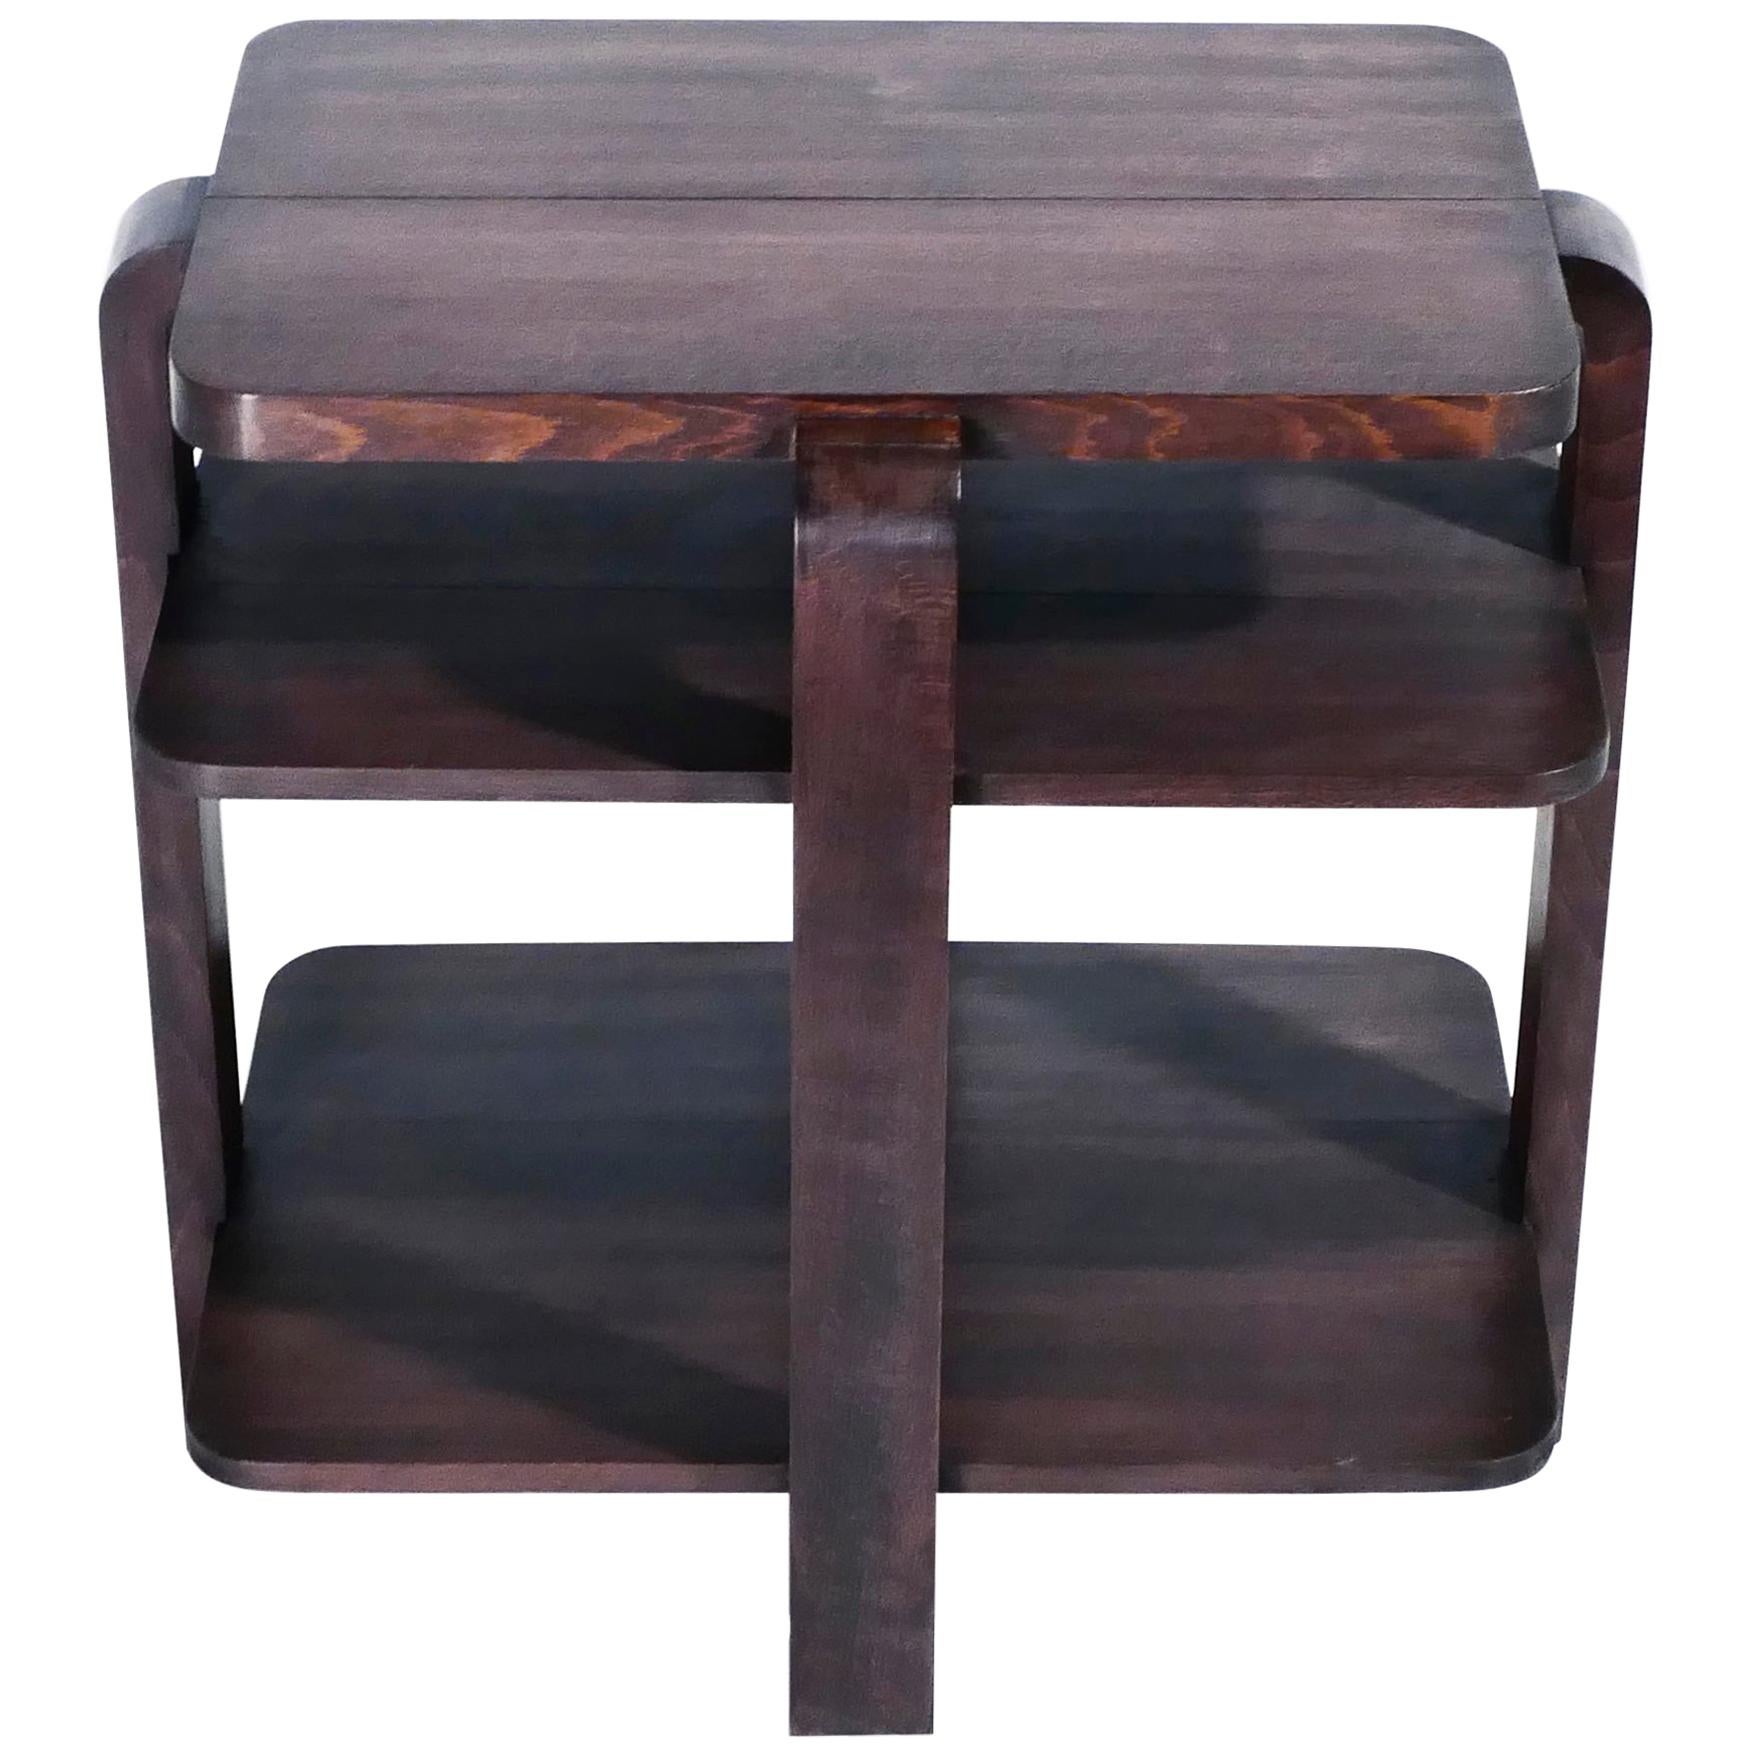 This side table or end table is crafted entirely from warm mahogany. Pure French Art Deco creation, employing the use of geometrical shapes, and refraining from excessive decoration. The piece is neutral and sleek, with a beautiful patina, making it